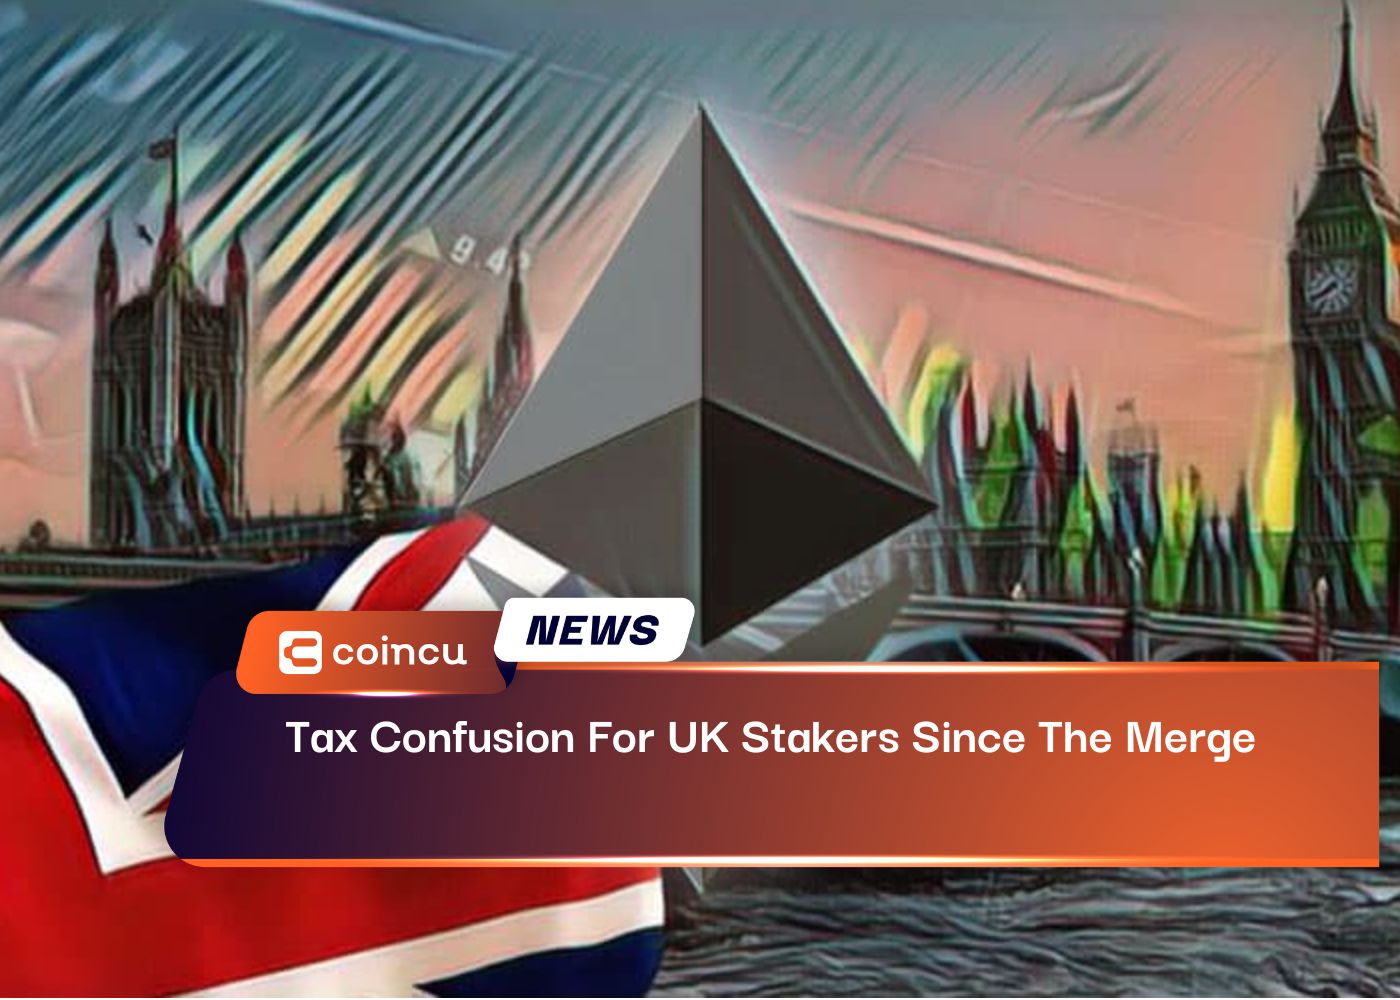 Tax Confusion For UK Stakers Since The Merge